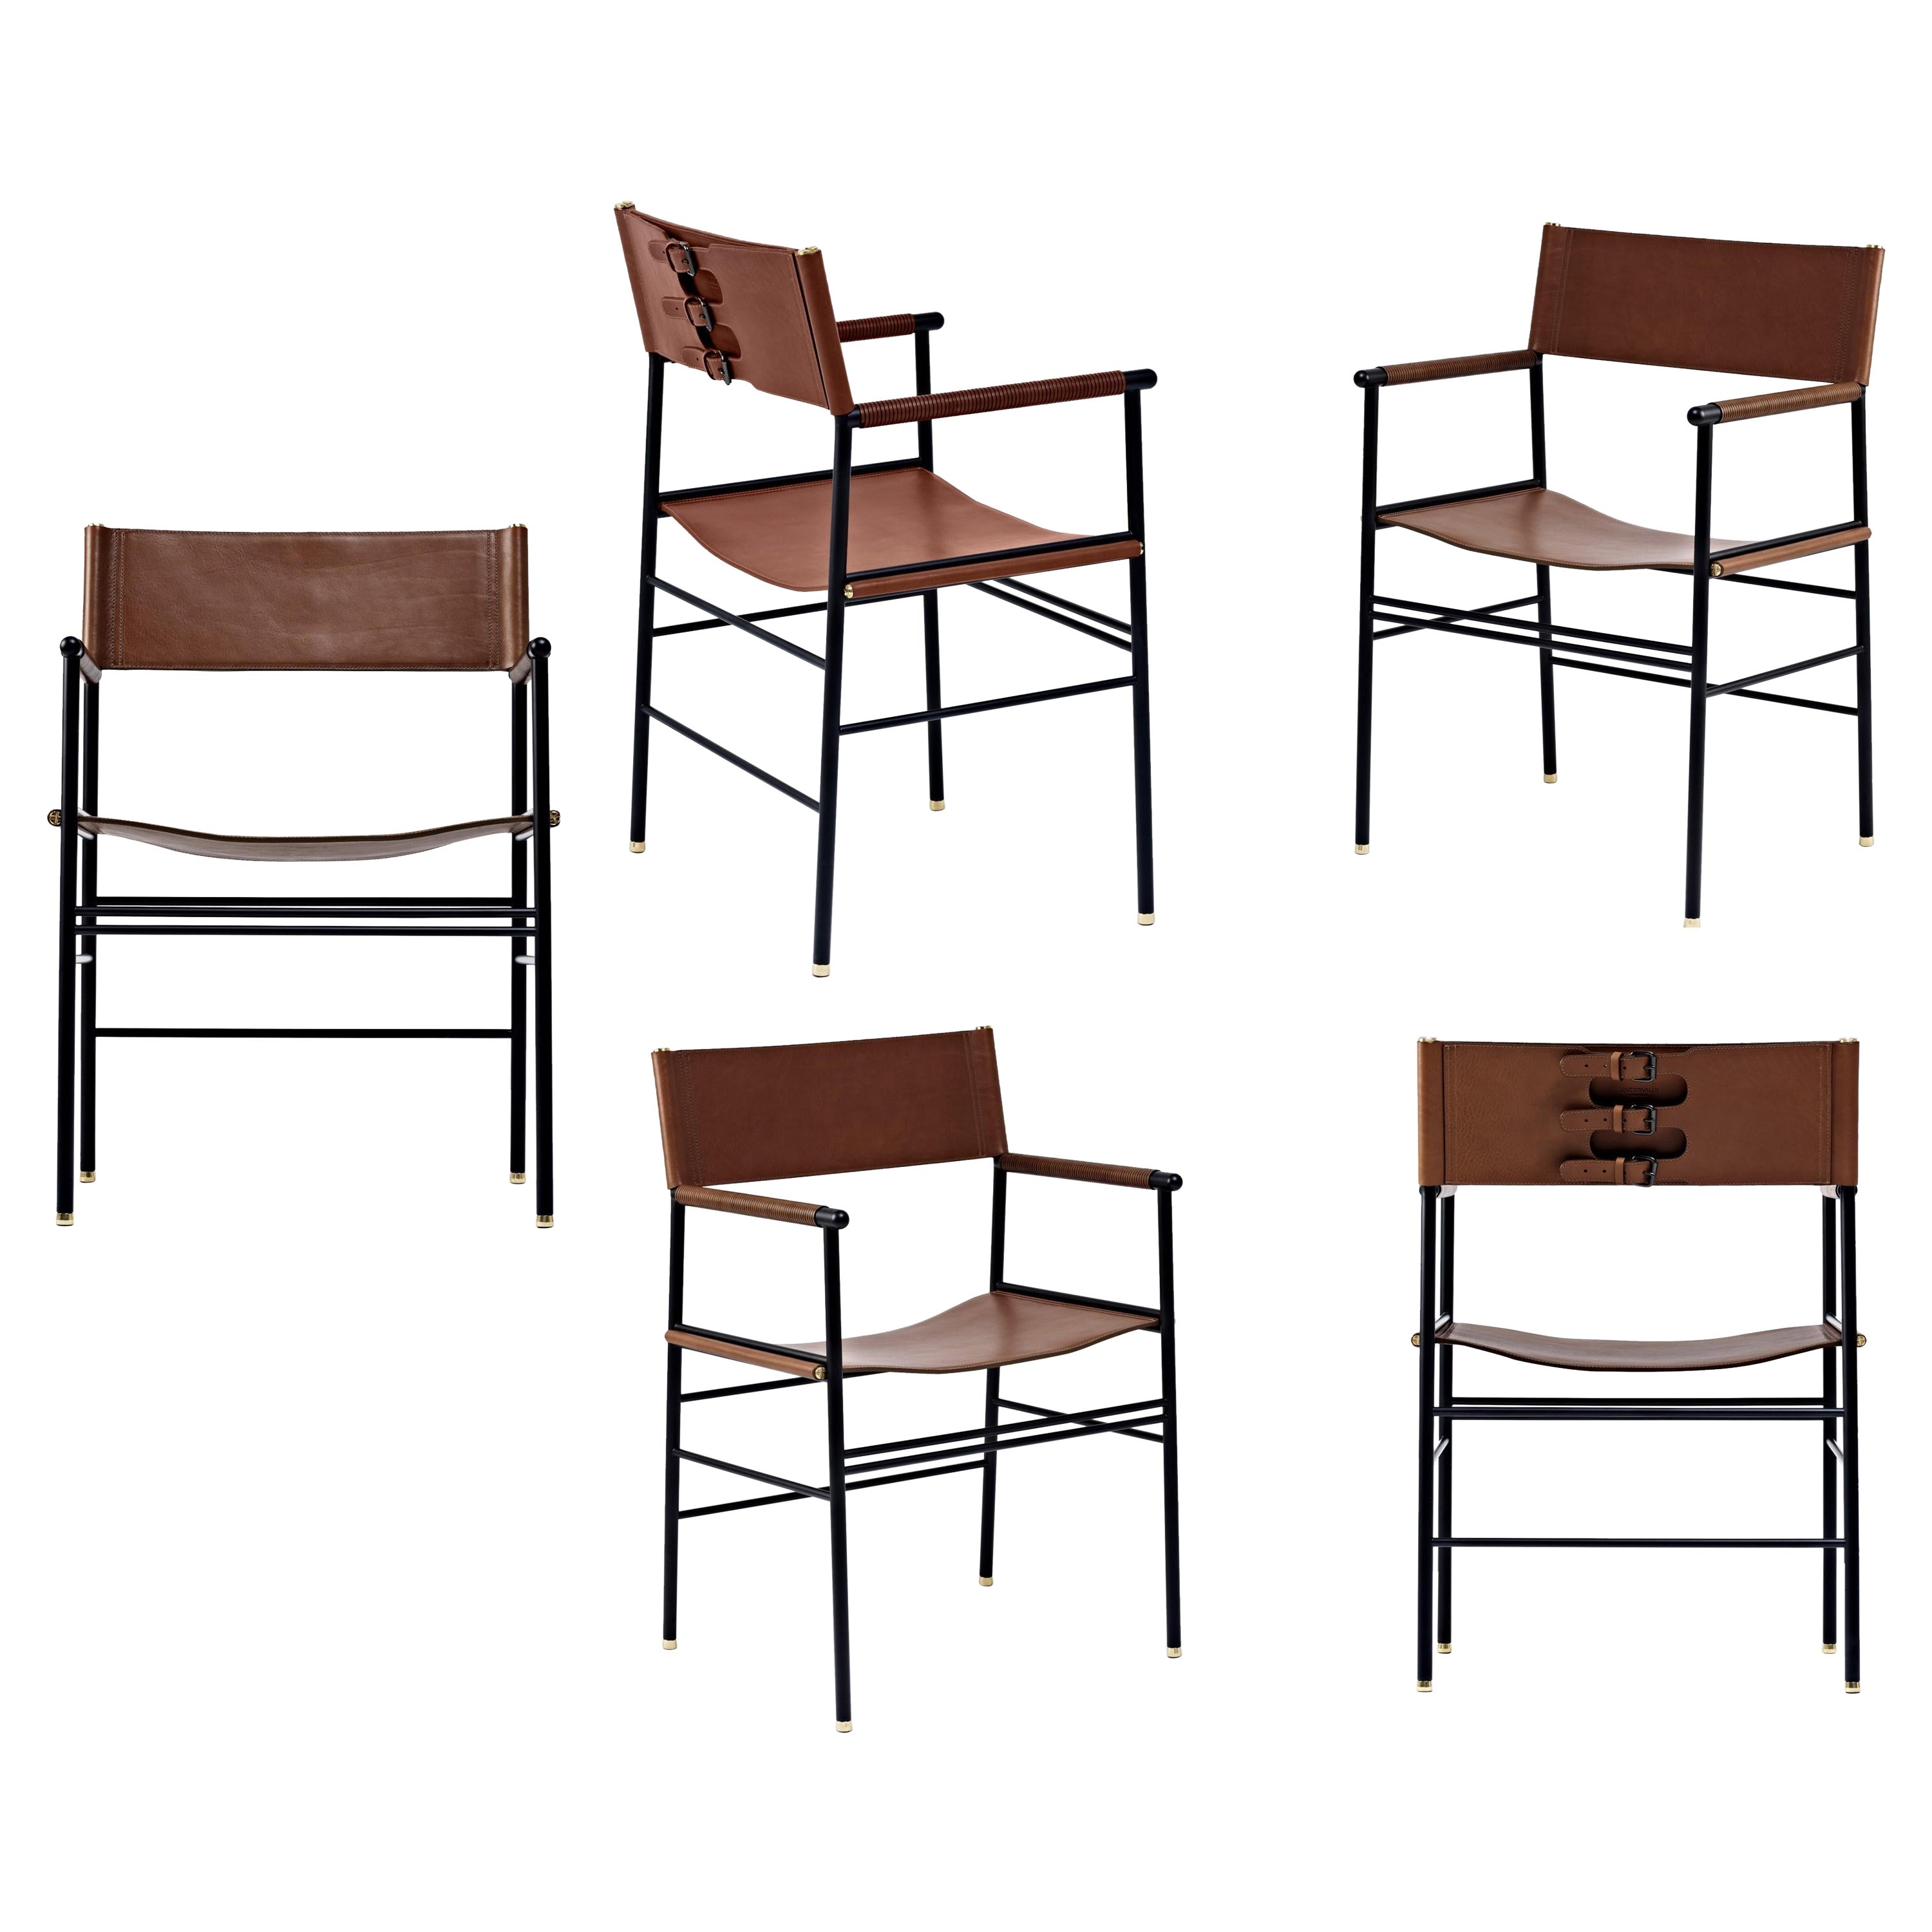 Set of 5 Classic Contemporary Armchair Dark Brown Leather & Black Rubber Metal